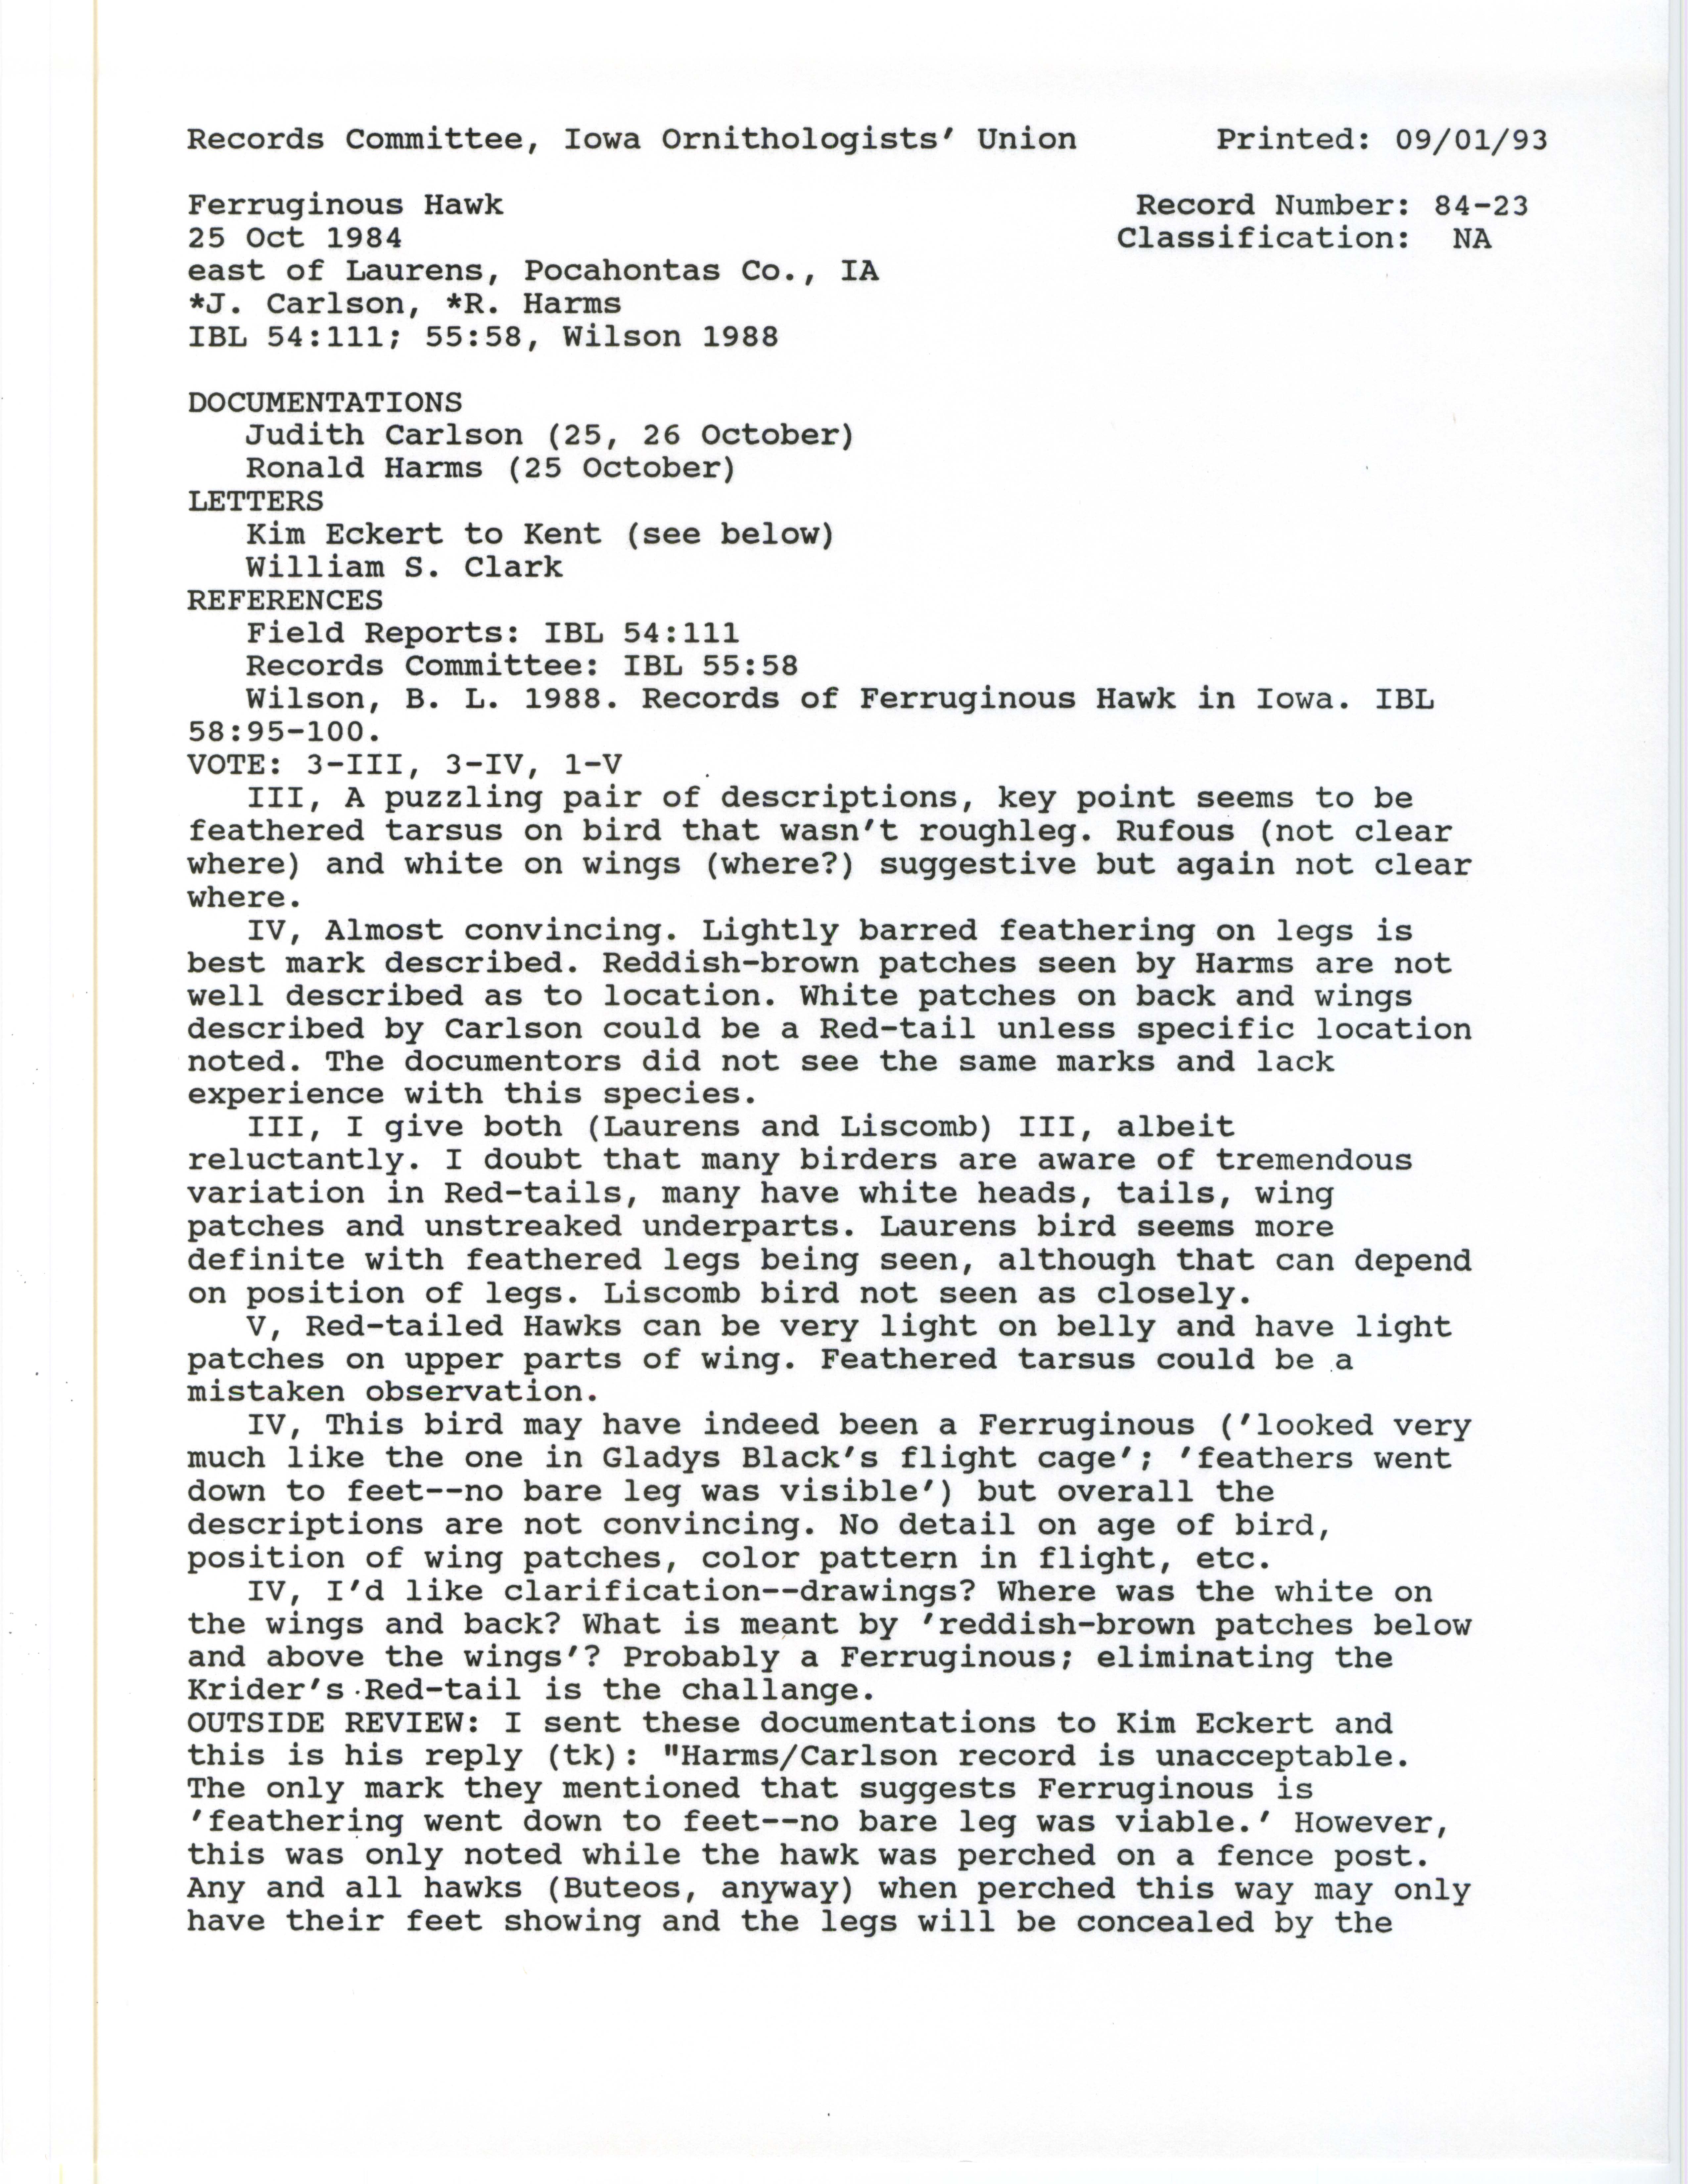 Records Committee review for rare bird sighting of Ferruginous Hawk east of Laurens, 1984